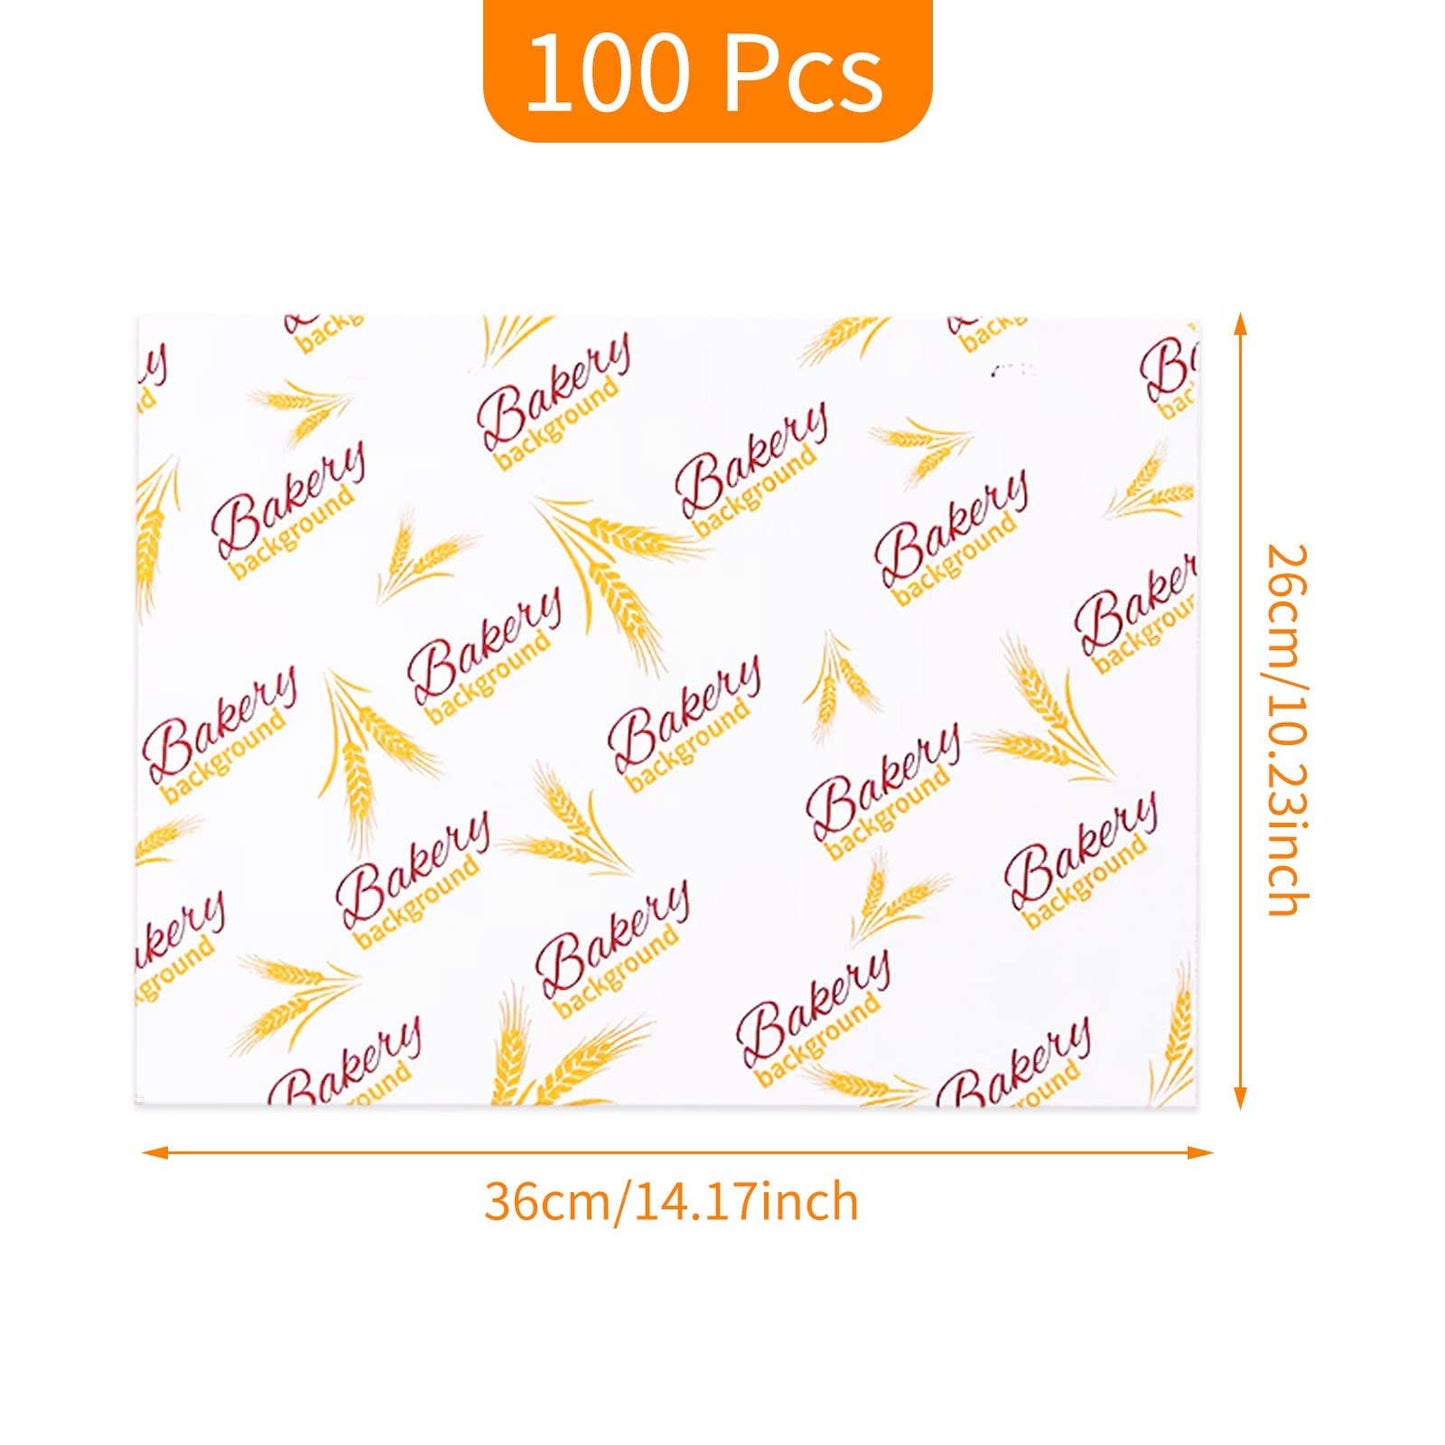 100 Sheets Greaseproof Paper, Baking Wrapping Paper Food Wax Paper Pattern of Wheat Ears, Food Basket Liners Paper Deli Paper for Breads French Fries Sandwiches Pizza Burgers Hot Dogs